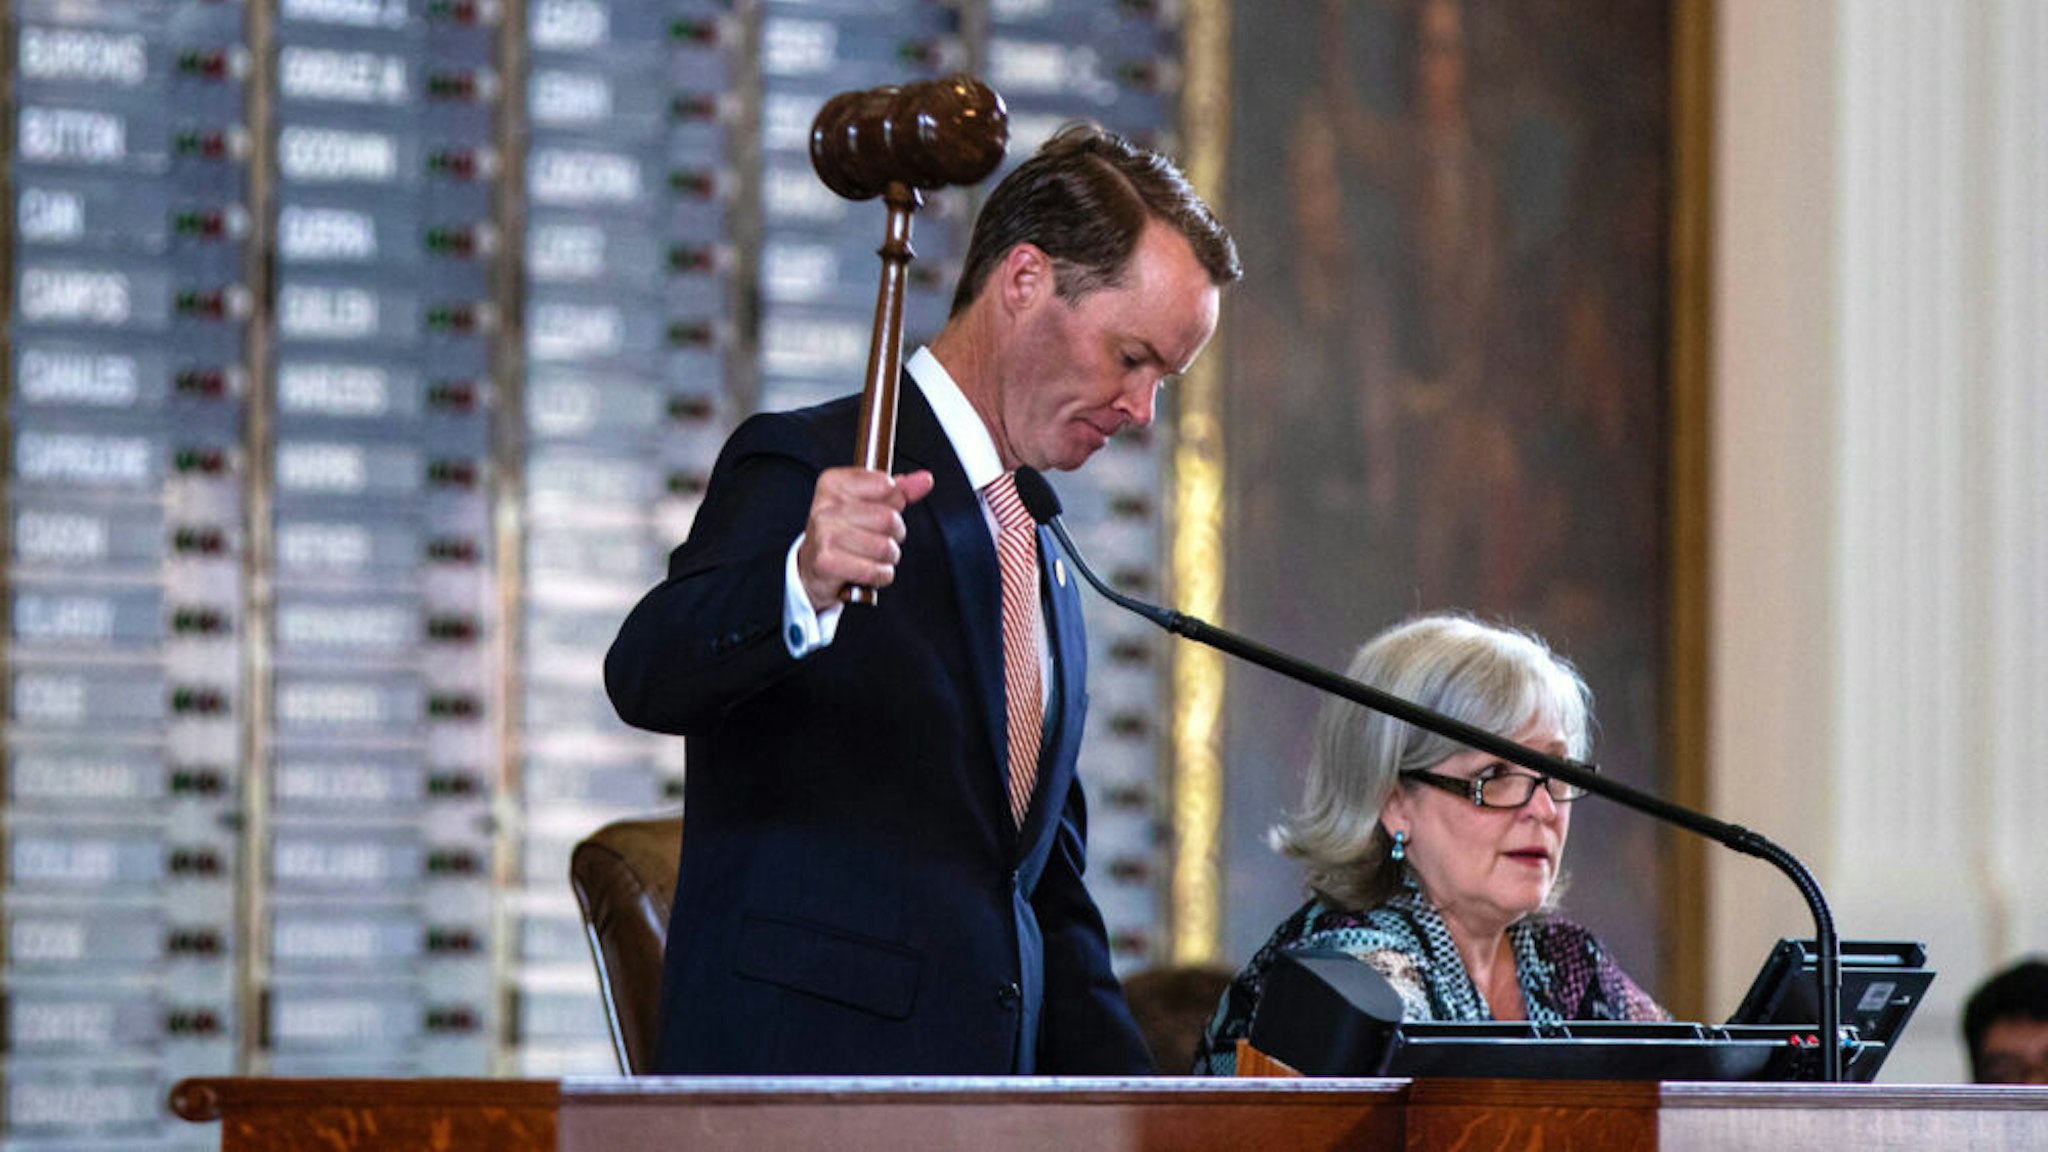 AUSTIN, TX - JULY 08: Texas Speaker of the House Dade Phelan, R-Beaumont, gavels in the 87th Legislature's special session in the House chamber at the State Capitol on July 8, 2021 in Austin, Texas. Republican Gov. Greg Abbott called the legislature into a special session, asking lawmakers to prioritize his agenda items that include overhauling the states voting laws, bail reform, border security, social media censorship, and critical race theory.